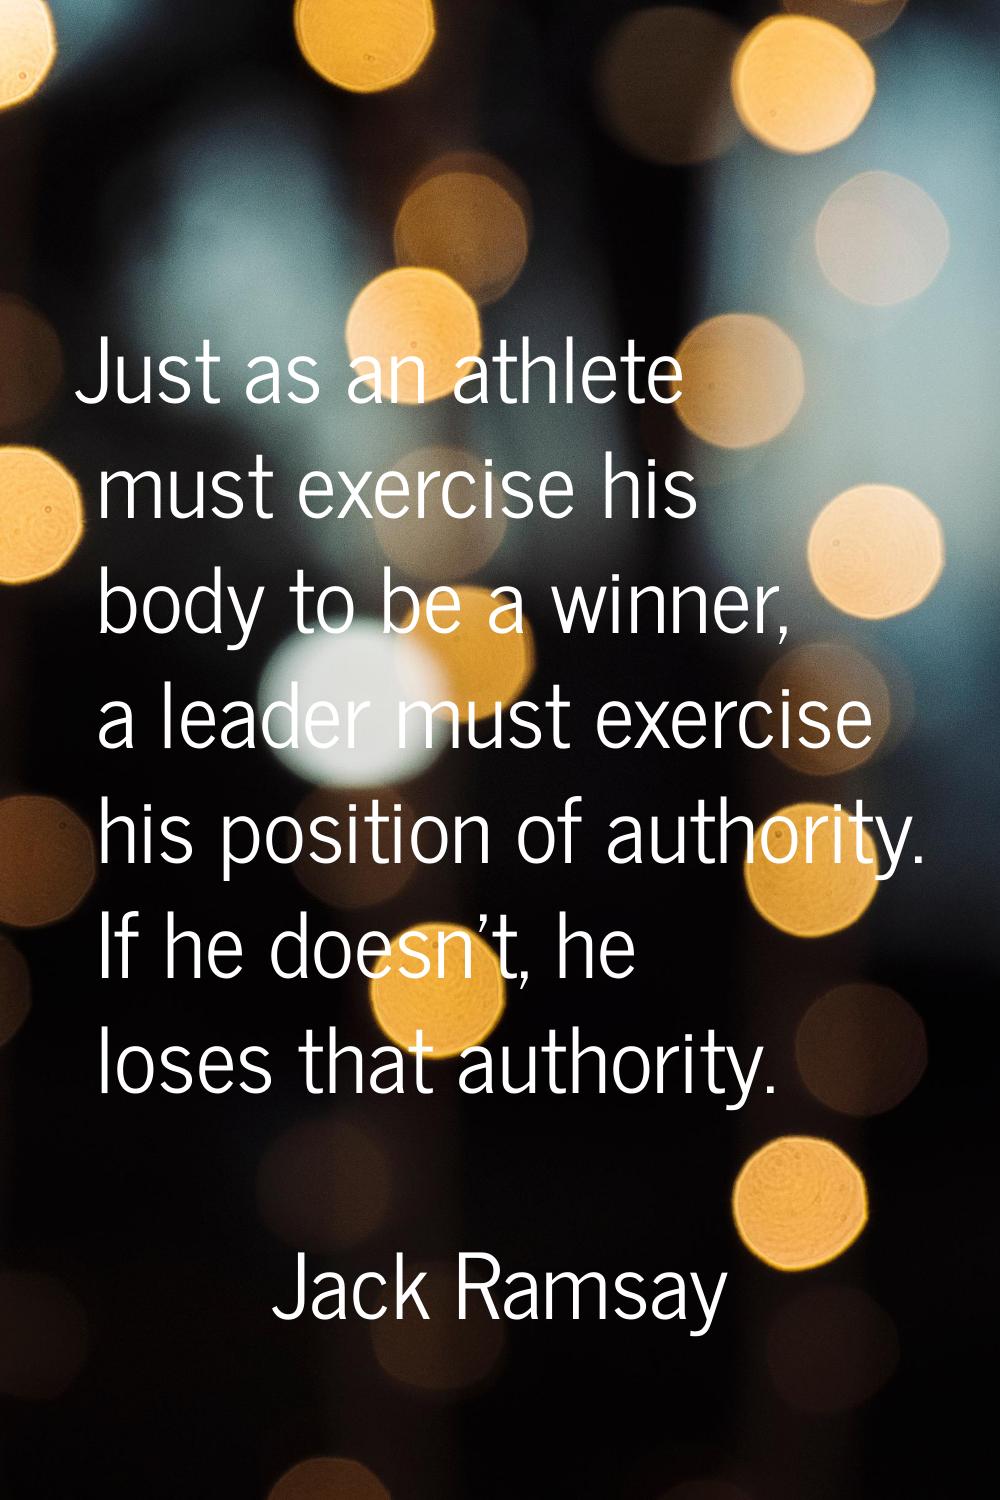 Just as an athlete must exercise his body to be a winner, a leader must exercise his position of au